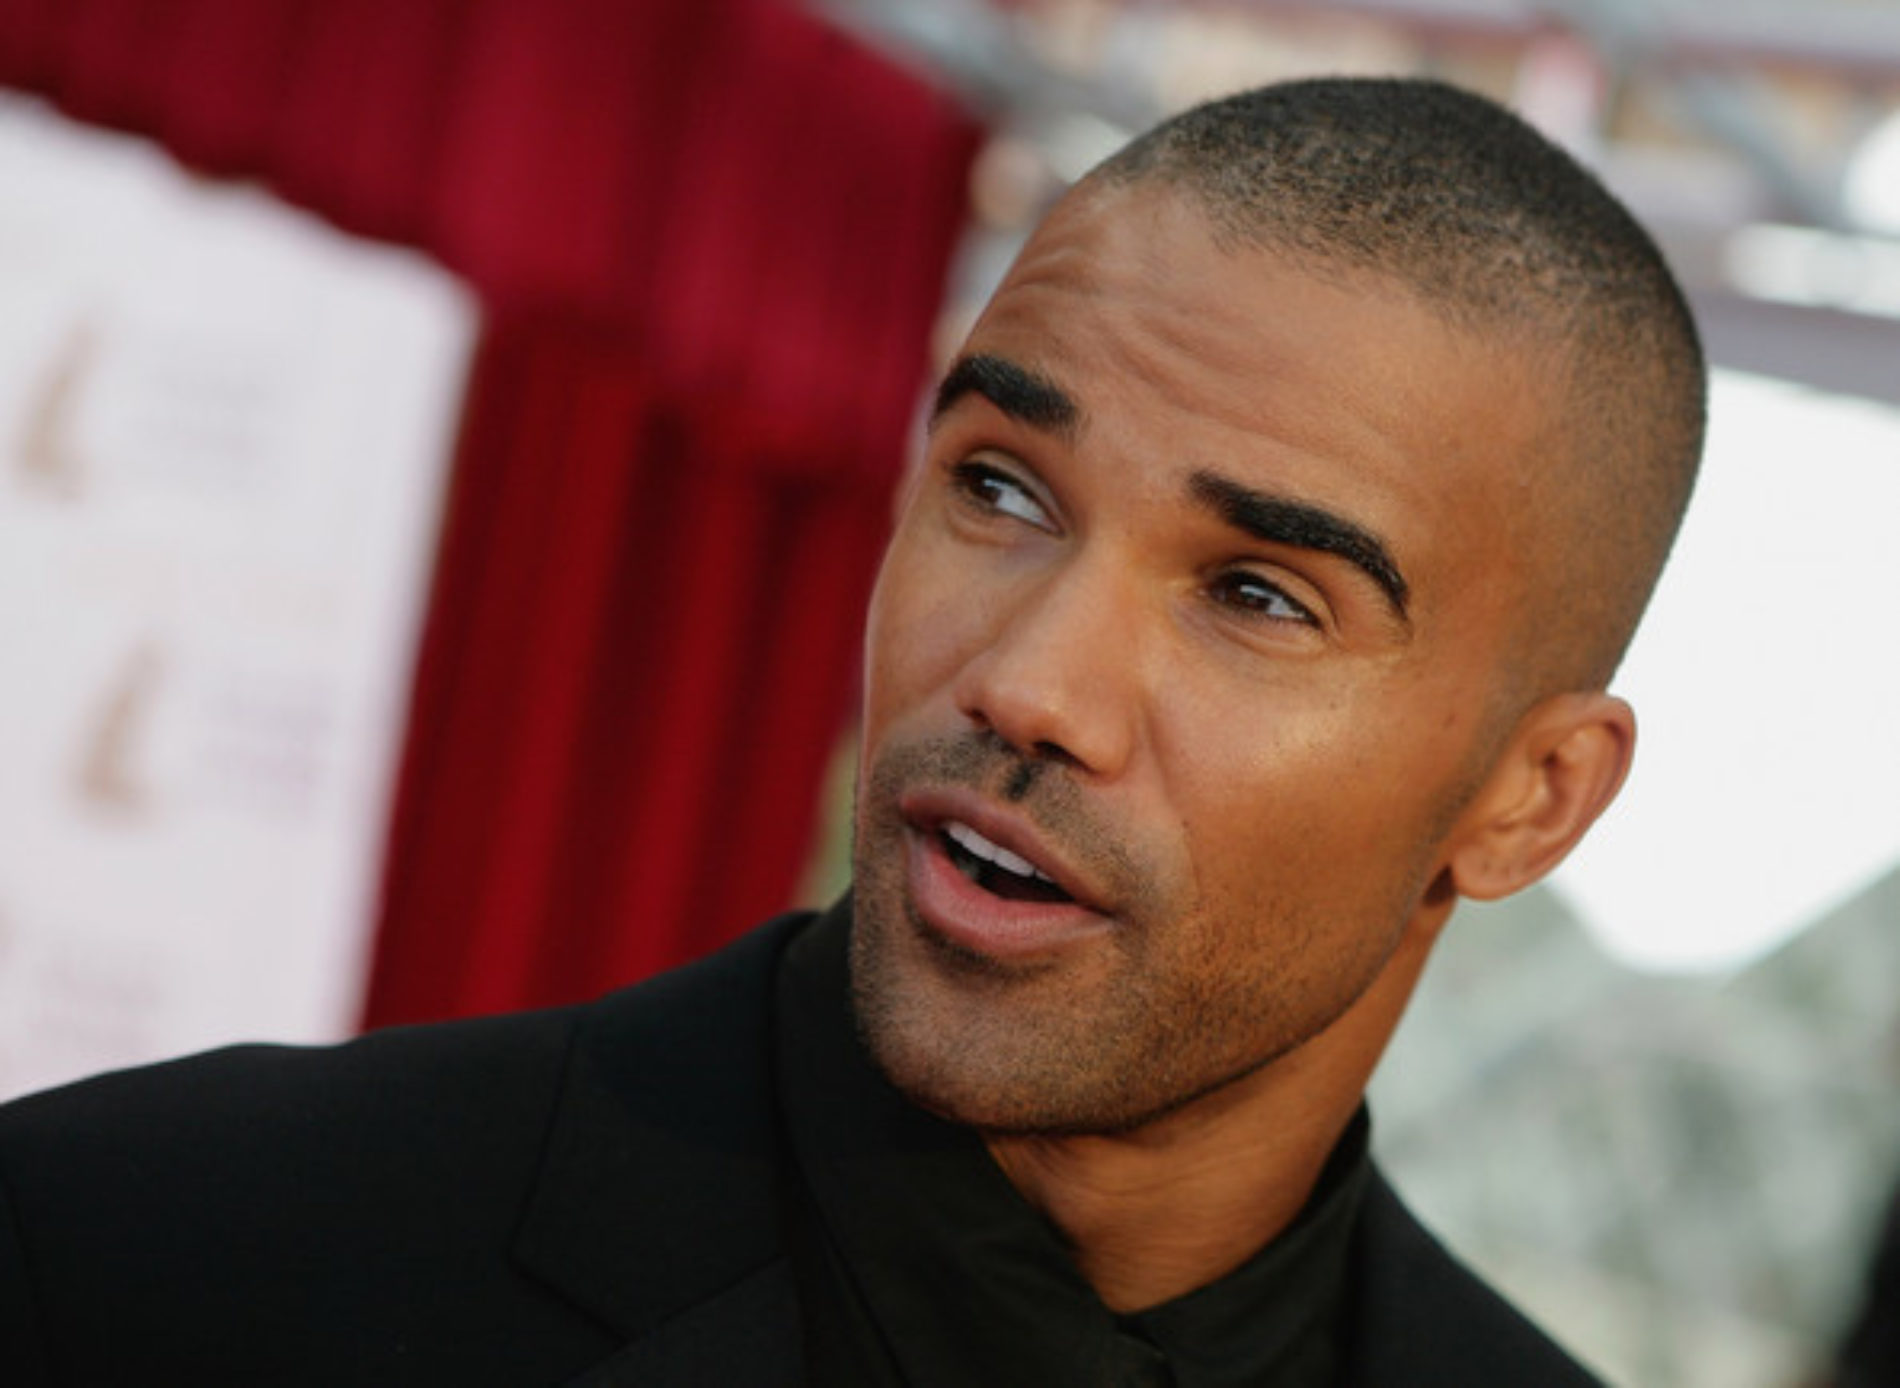 ‘If You Think I’m Gay, Send Your Girlfriend Over to My House.’ Shemar Moore on those gay rumors